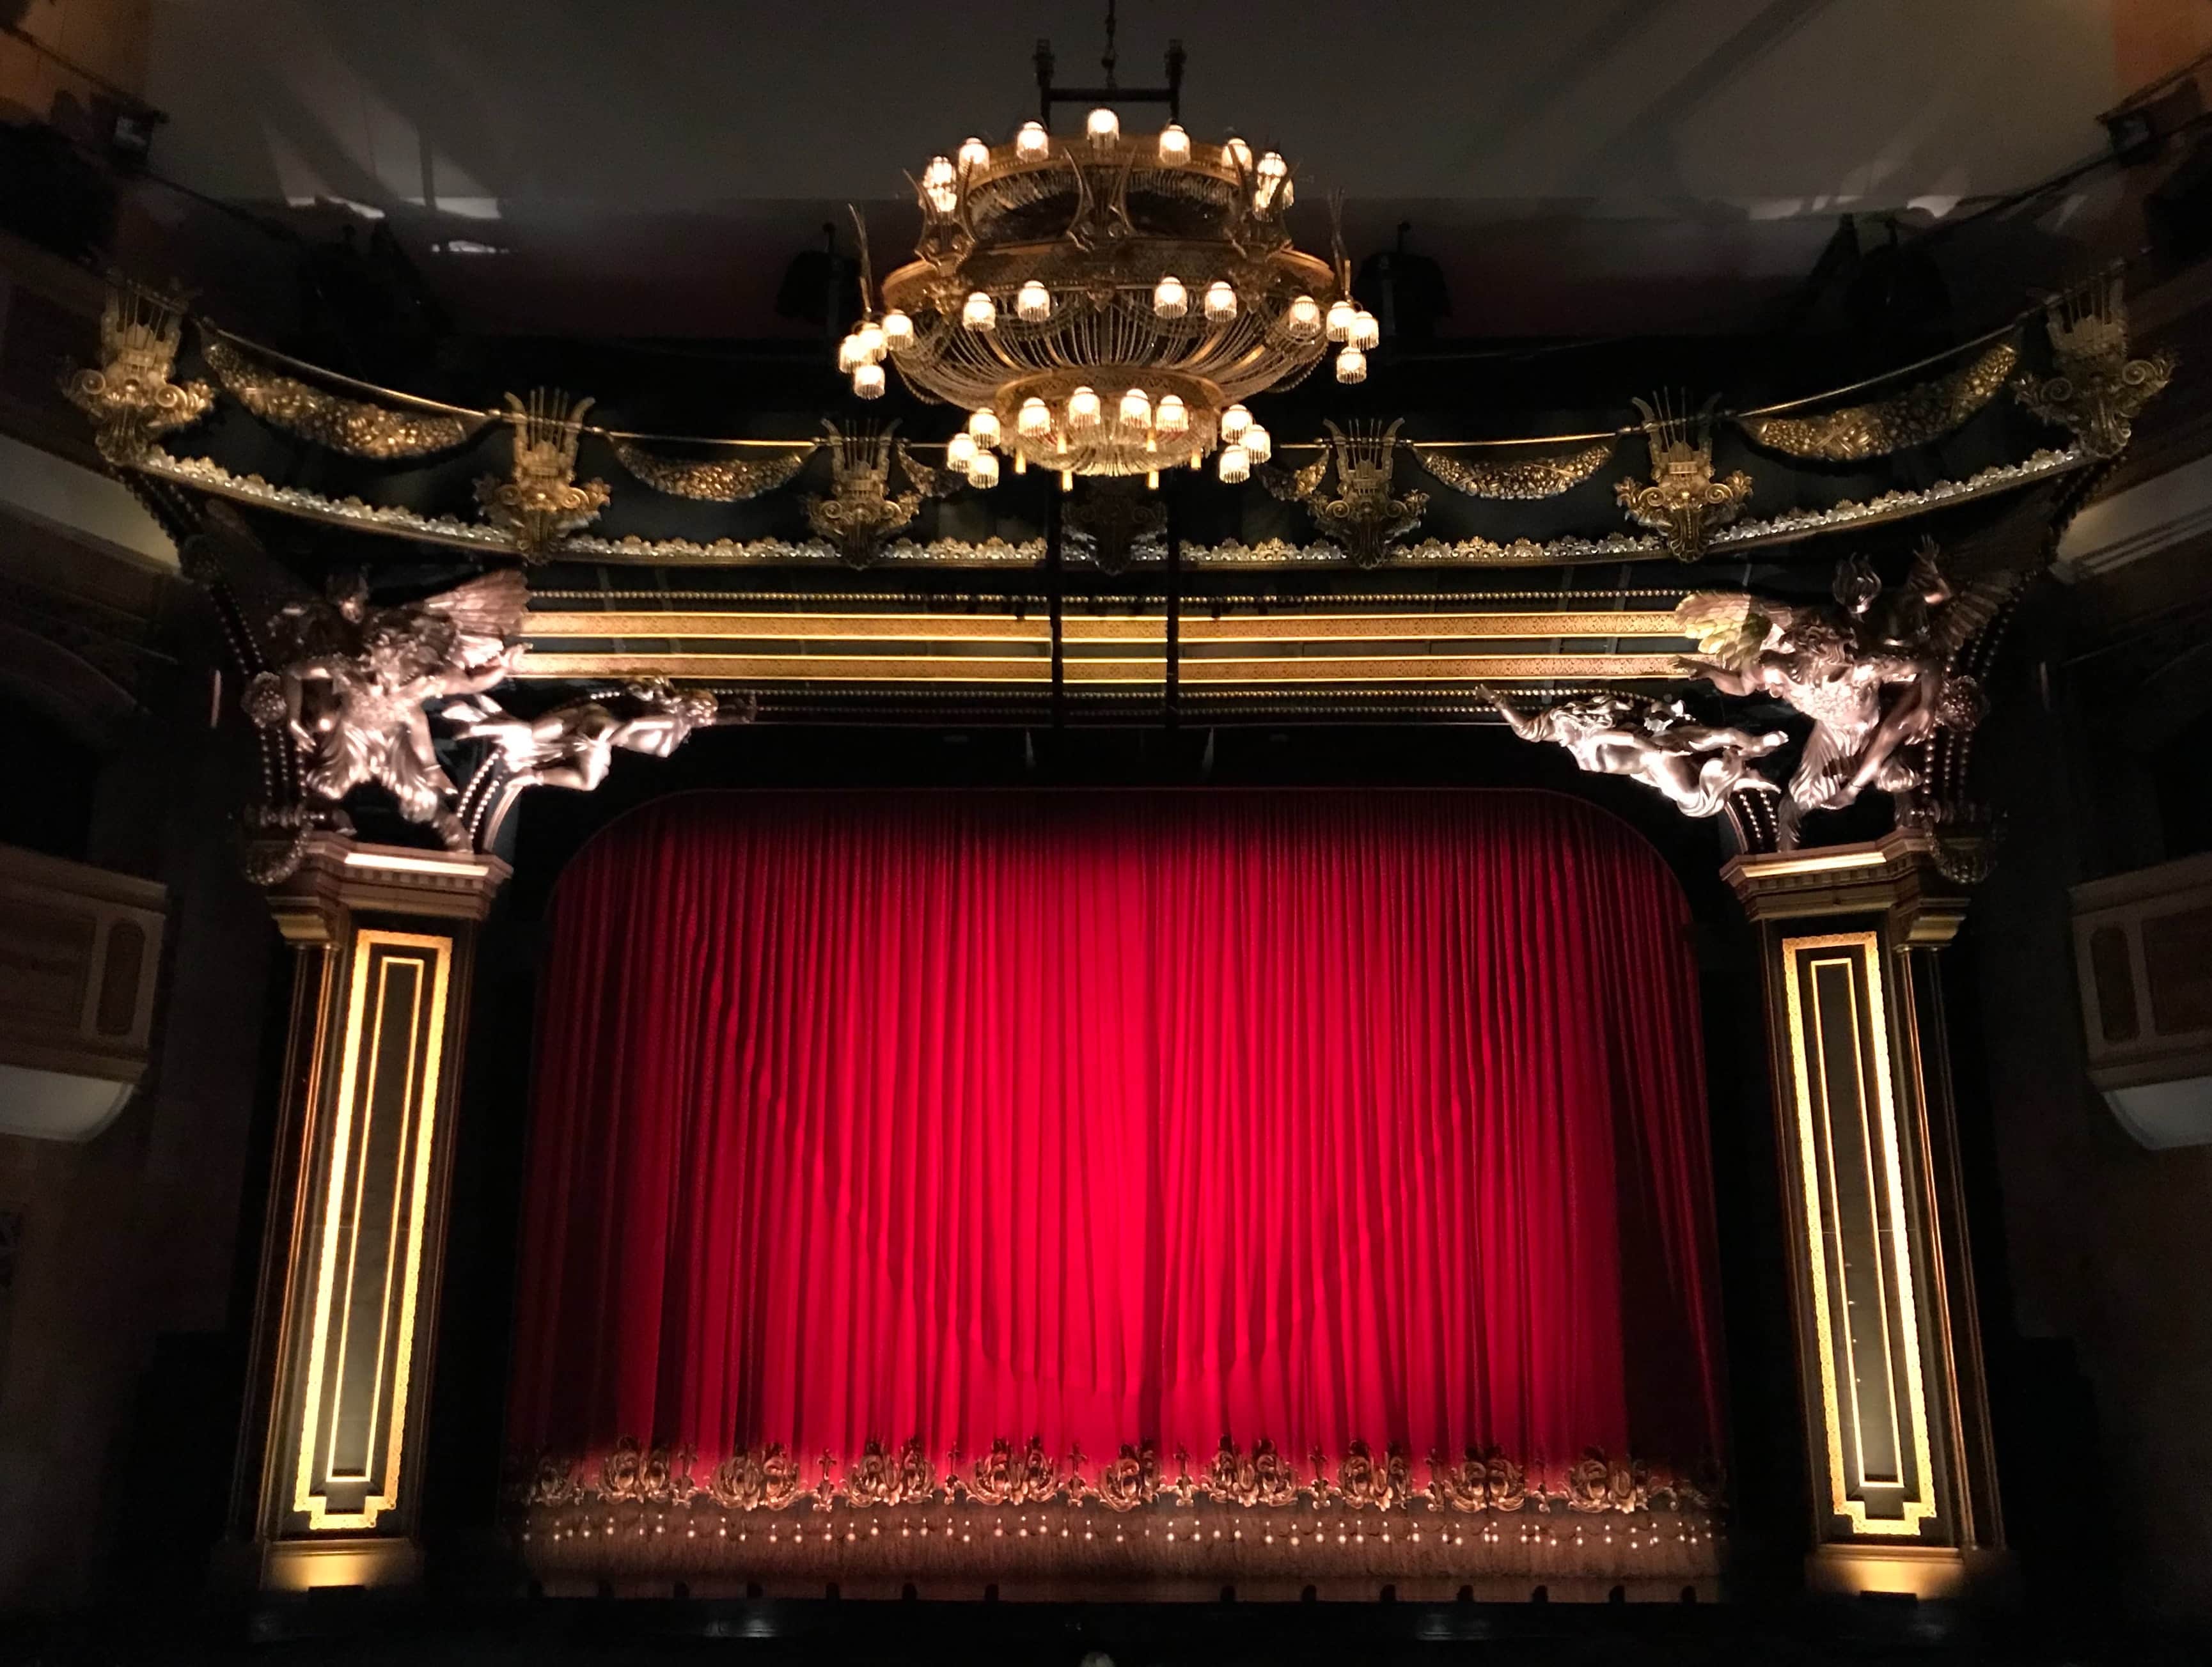 Filmmaking Trends in 2020 - An Image of a red Curtain in a Theatre